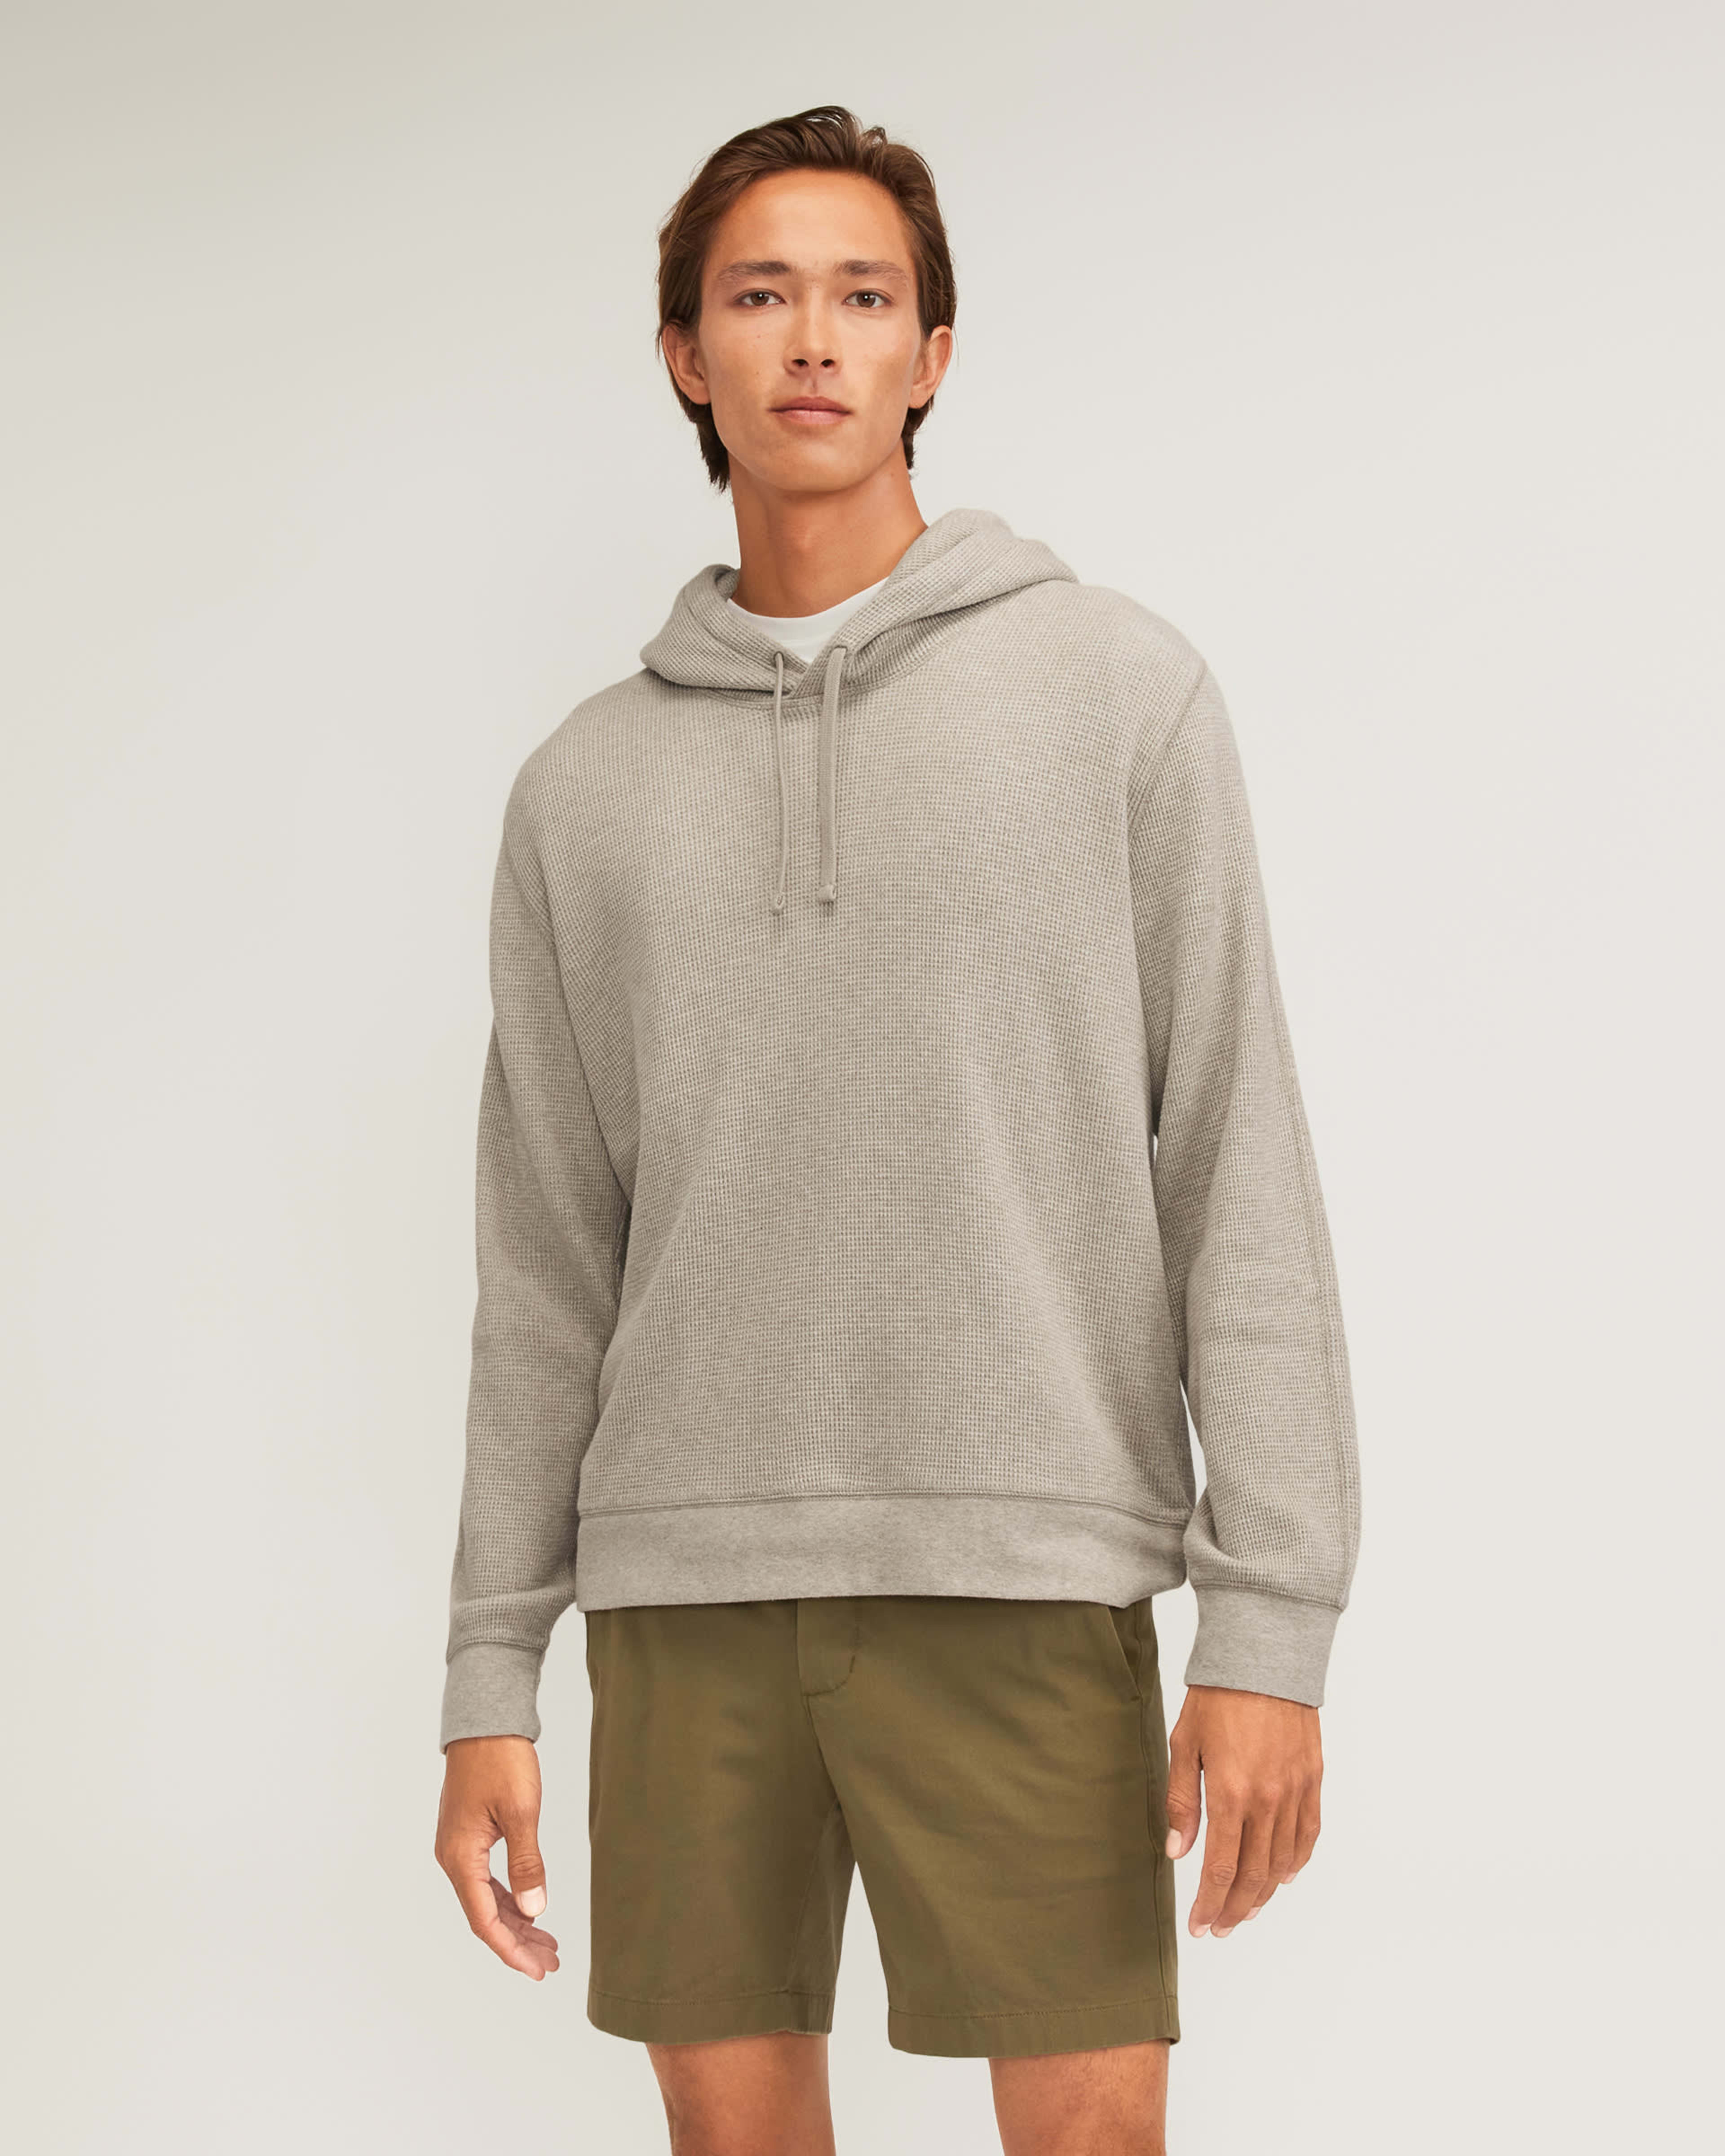 Everlane Men's Waffle-Knit Hoodie in Heathered Oatmeal, Size Small